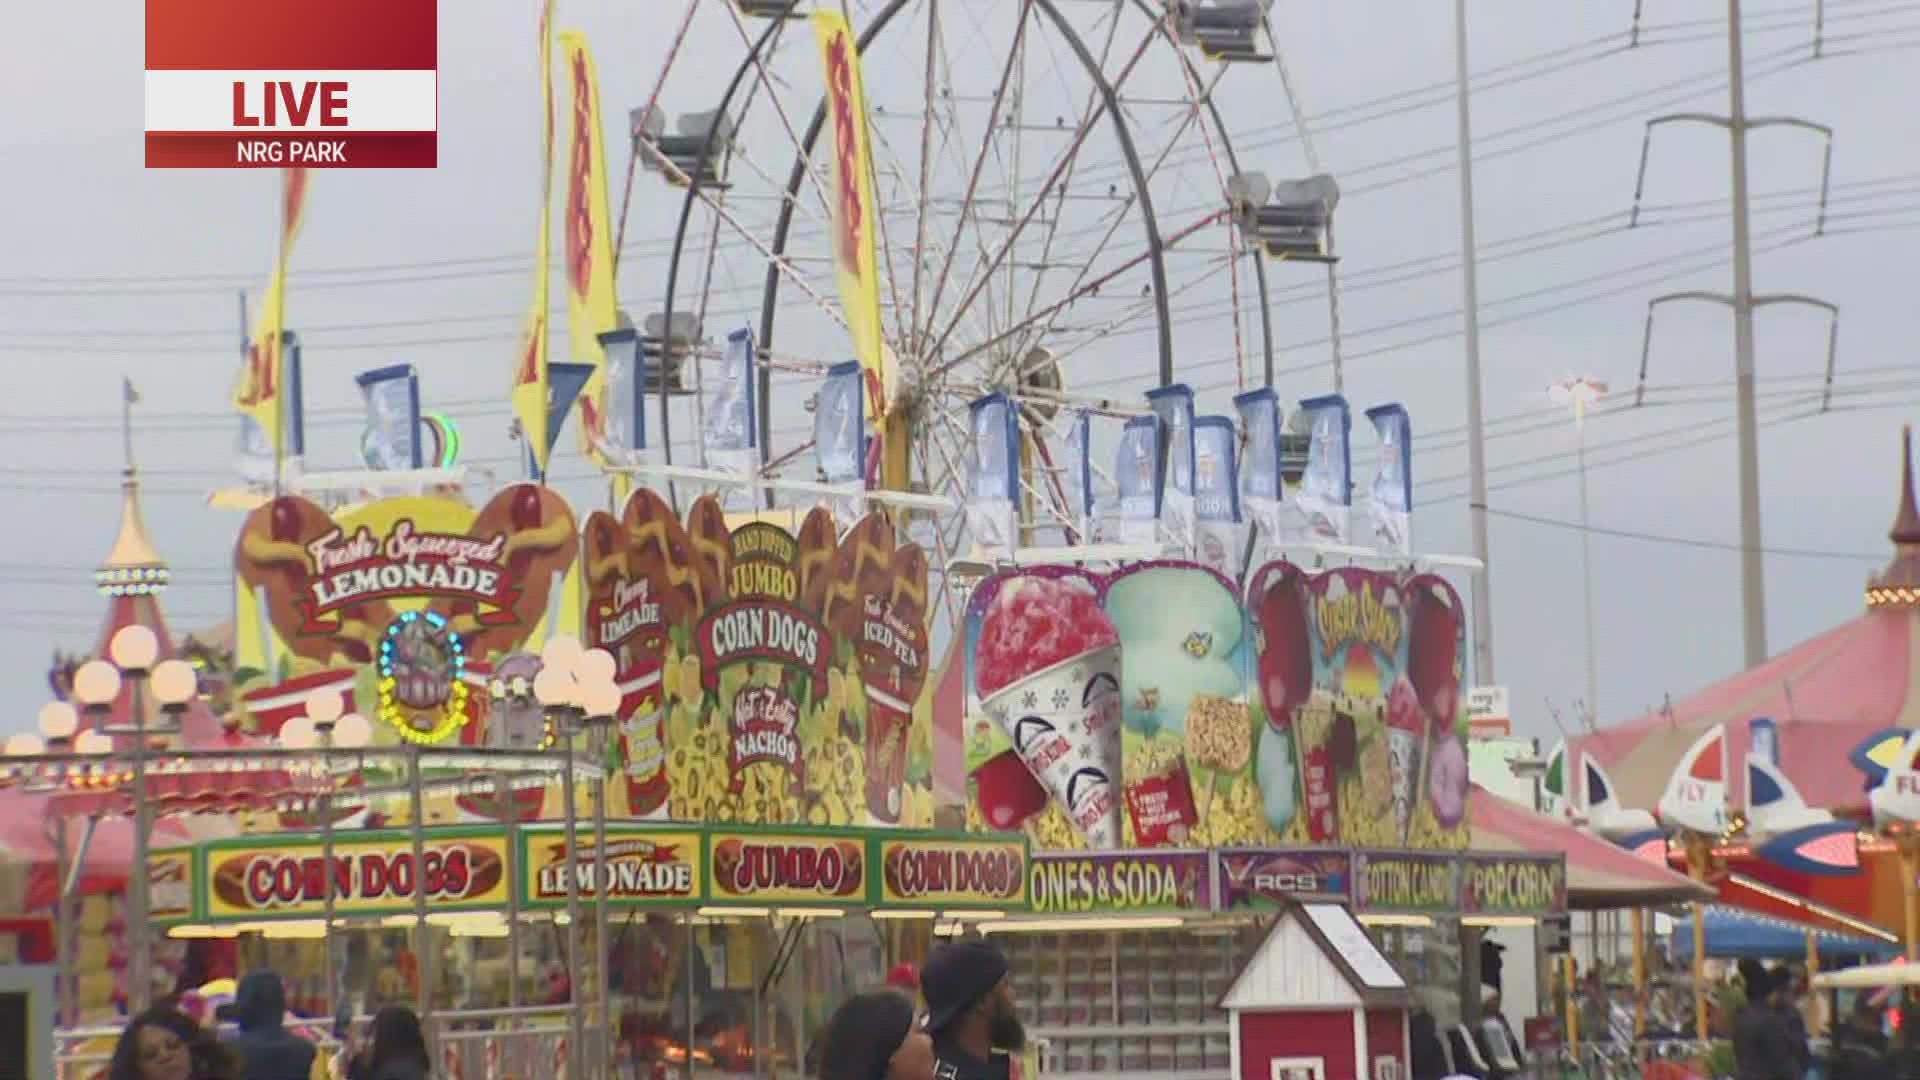 A cold front moved through the Houston area Friday bringing with it chilly temps and strong winds. But that's not stopping people from enjoying the Houston rodeo.